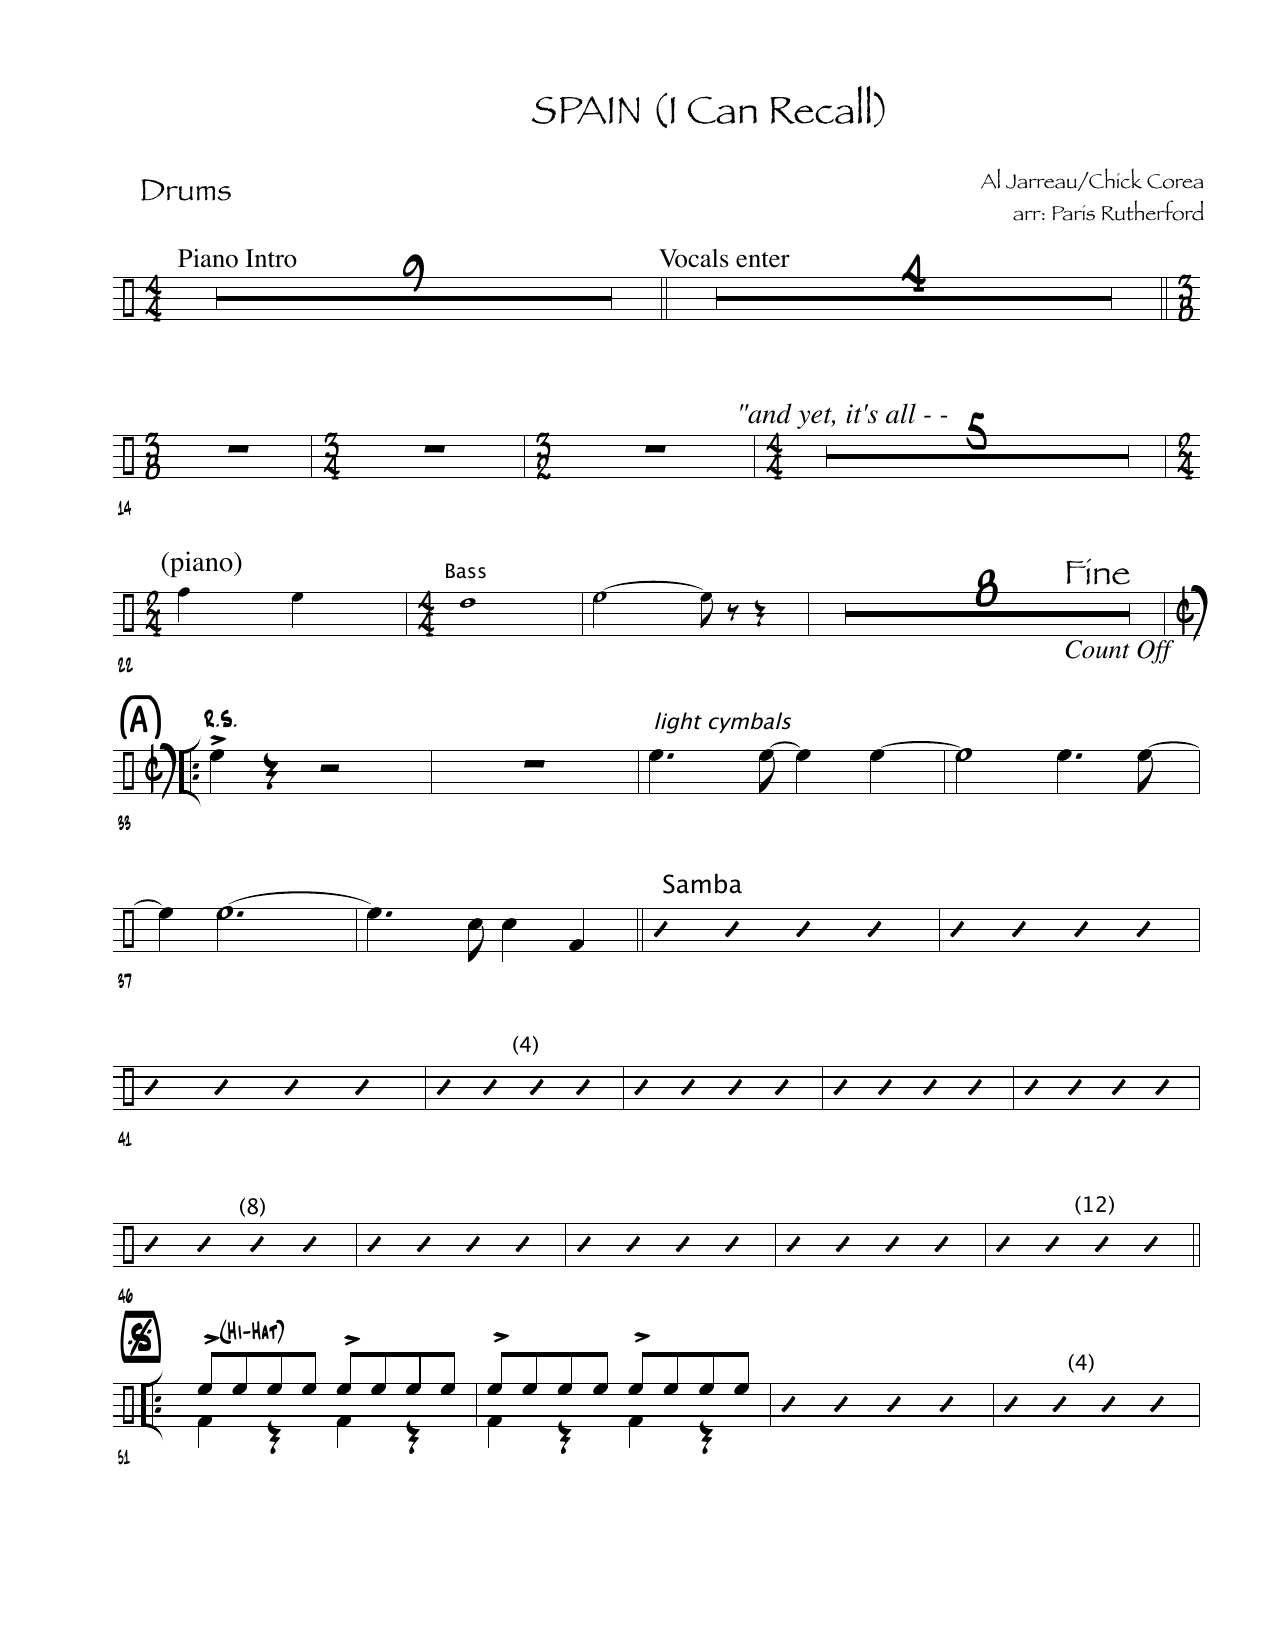 Chick Corea (I Can Recall) Spain (arr. Paris Rutherford) - Drums sheet music preview music notes and score for Choir Instrumental Pak including 2 page(s)